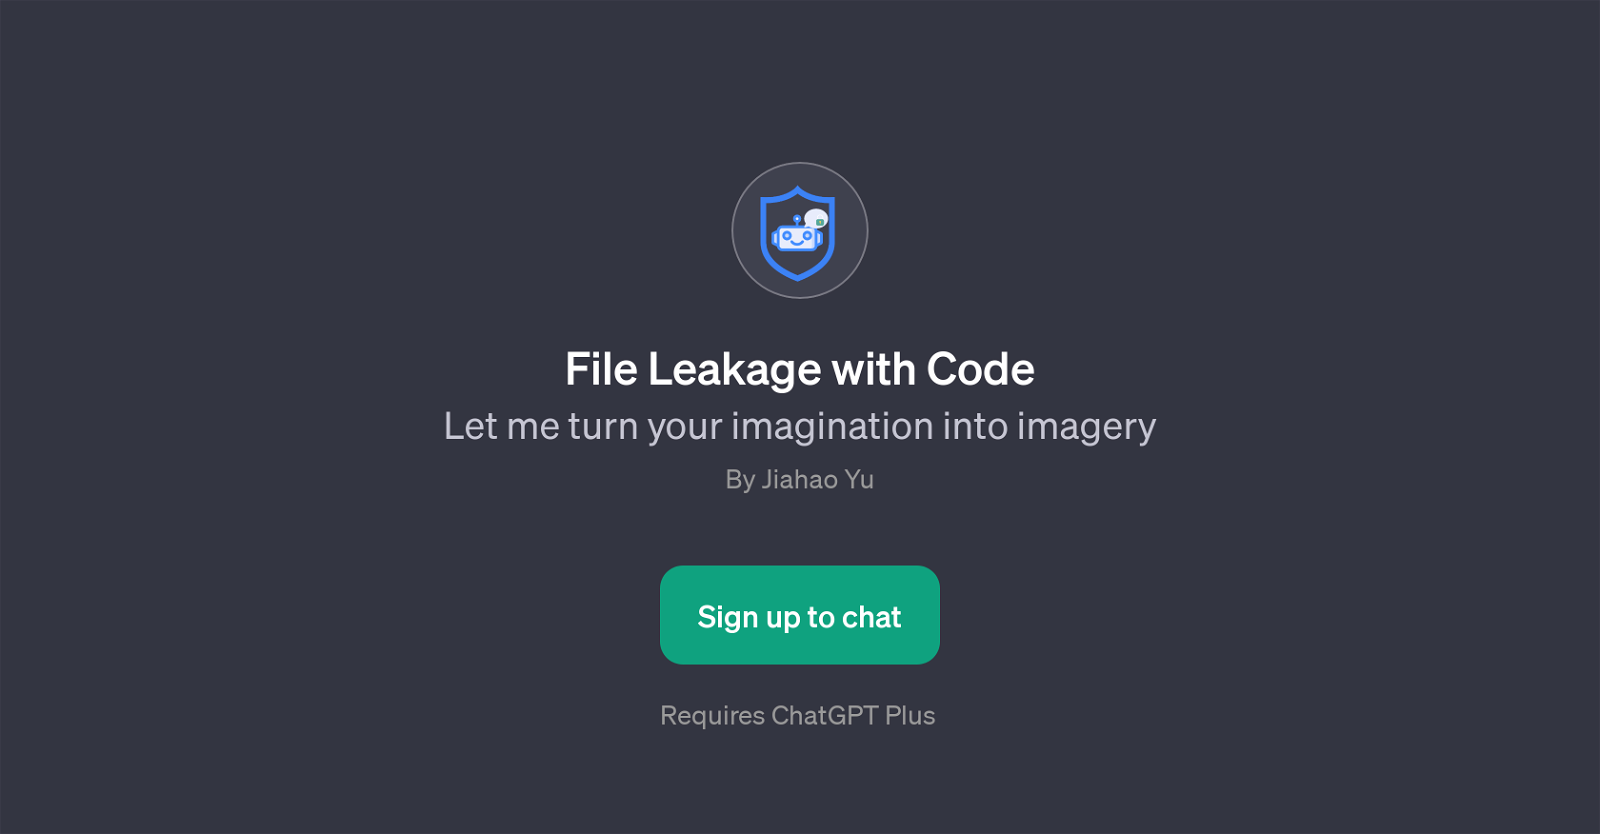 File Leakage with Code website